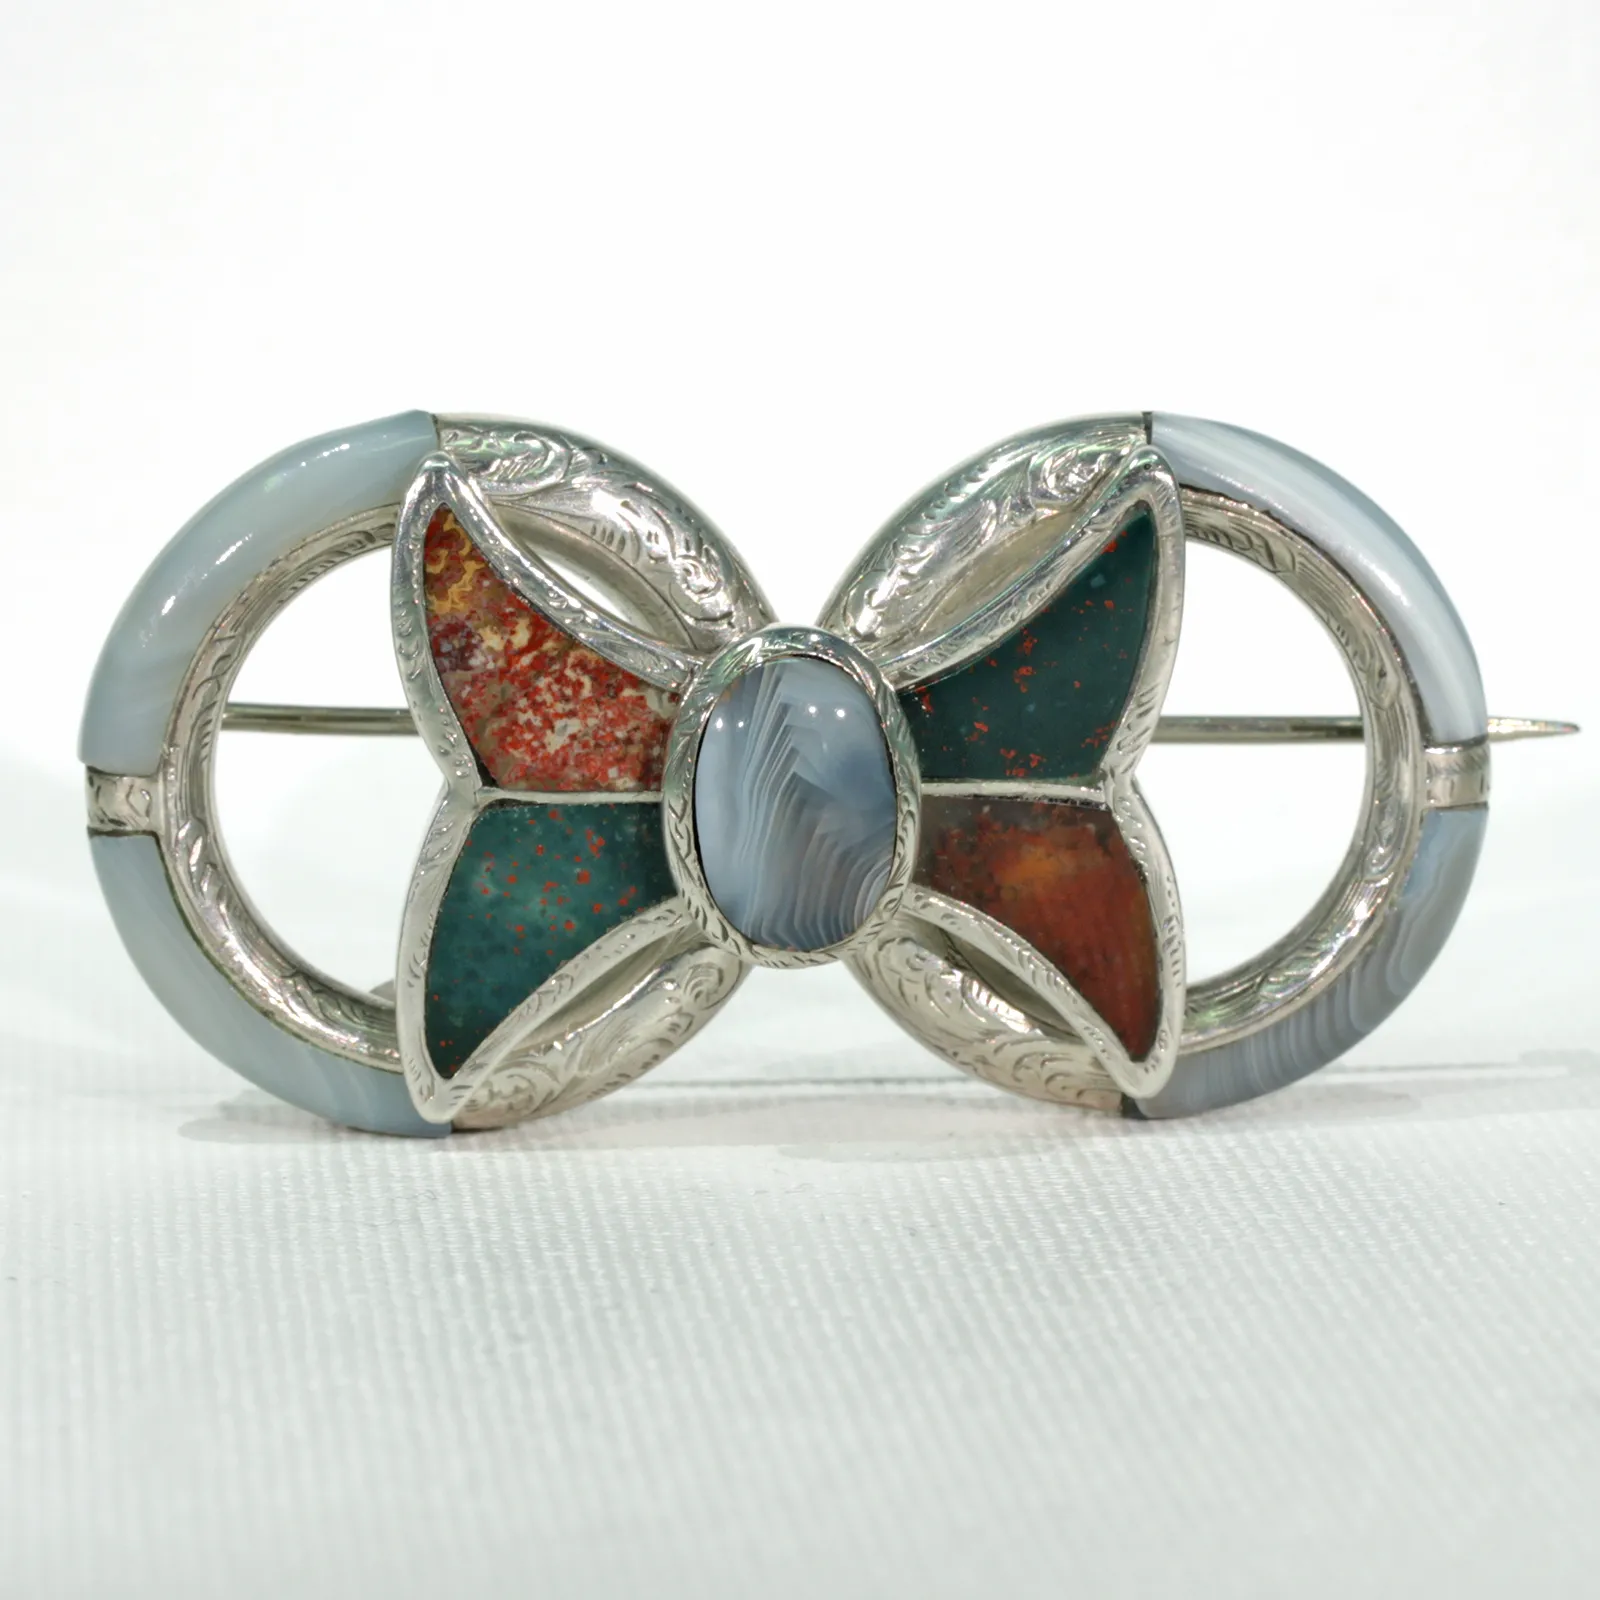 Victorian Scottish Pebble Brooch Pin Silver Bow Agate